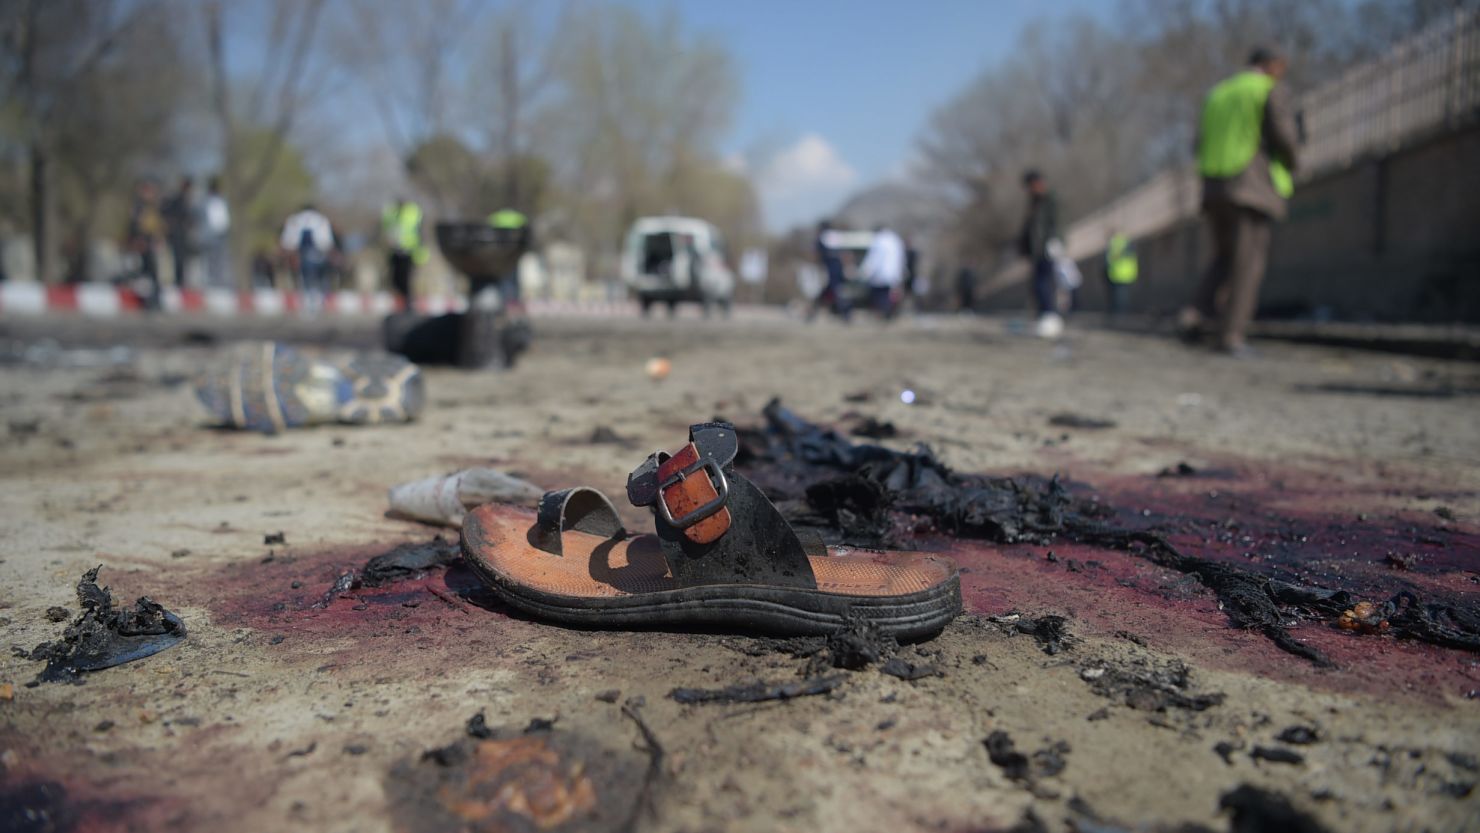 A sandal lies on the ground at the site of a suicide bomb attack in Kabul, Afghanistan, on March 21, 2018.